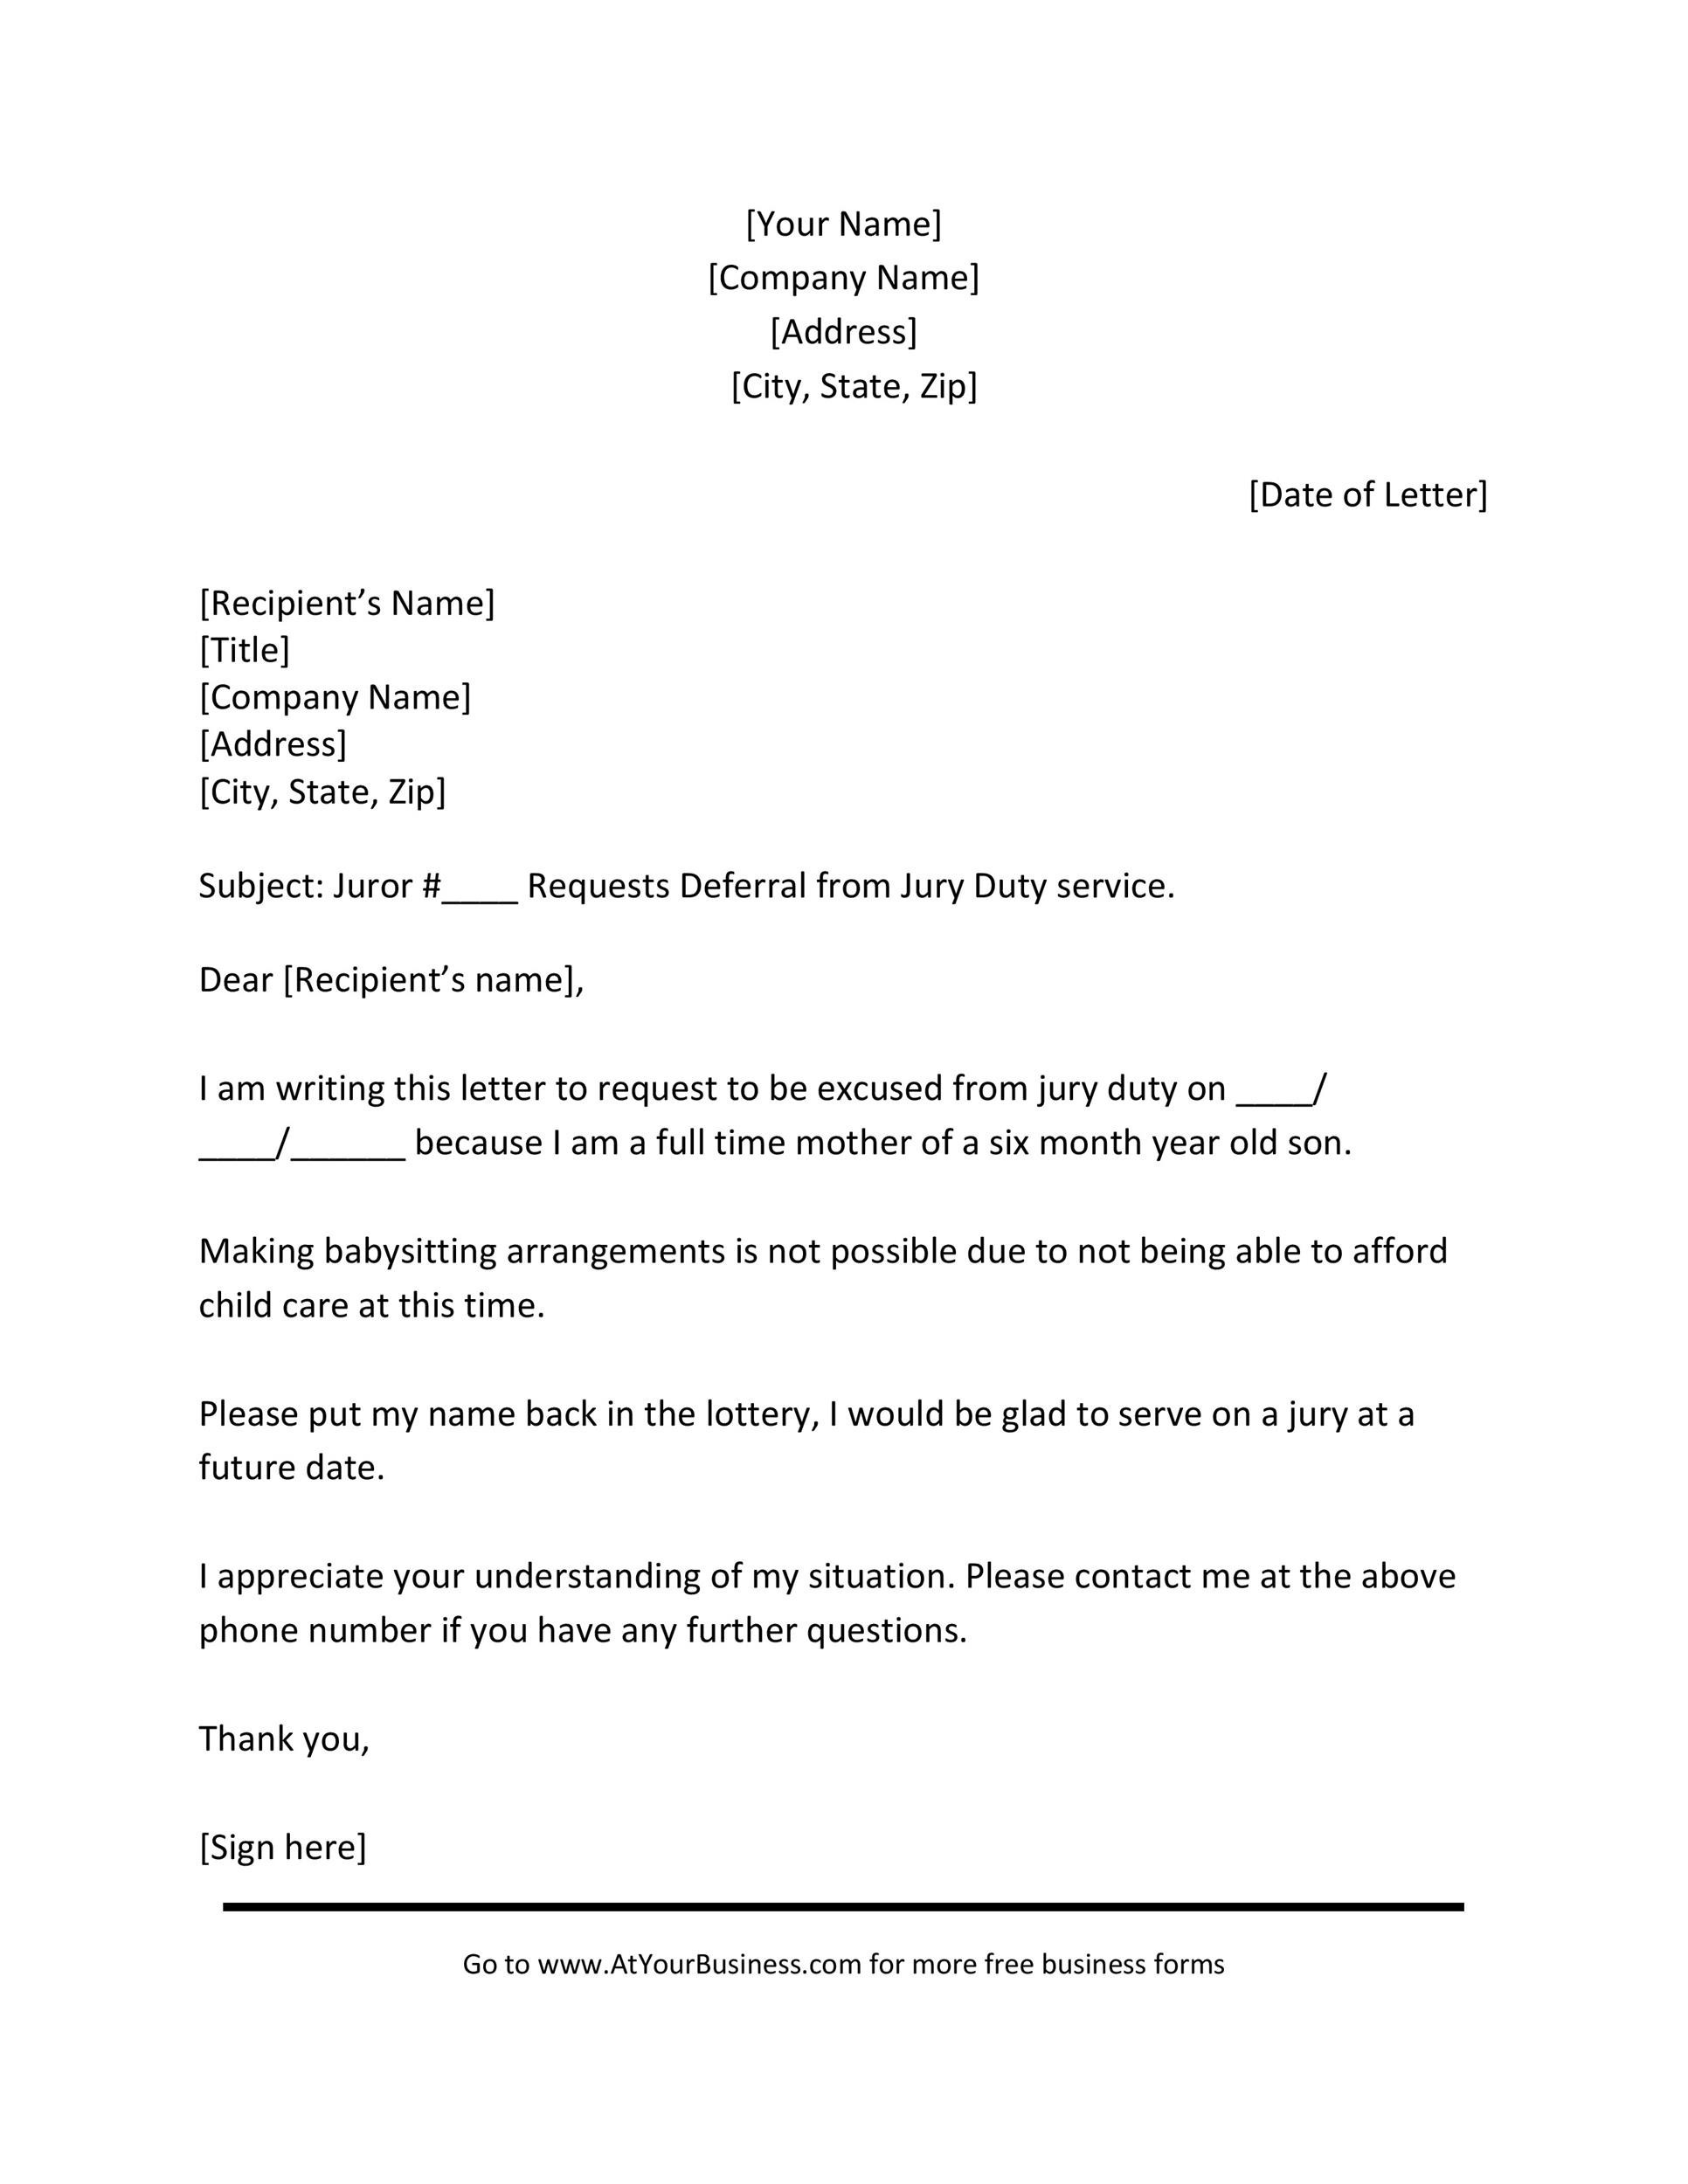 33 Best Jury Duty Excuse Letters [+Tips] ᐅ TemplateLab